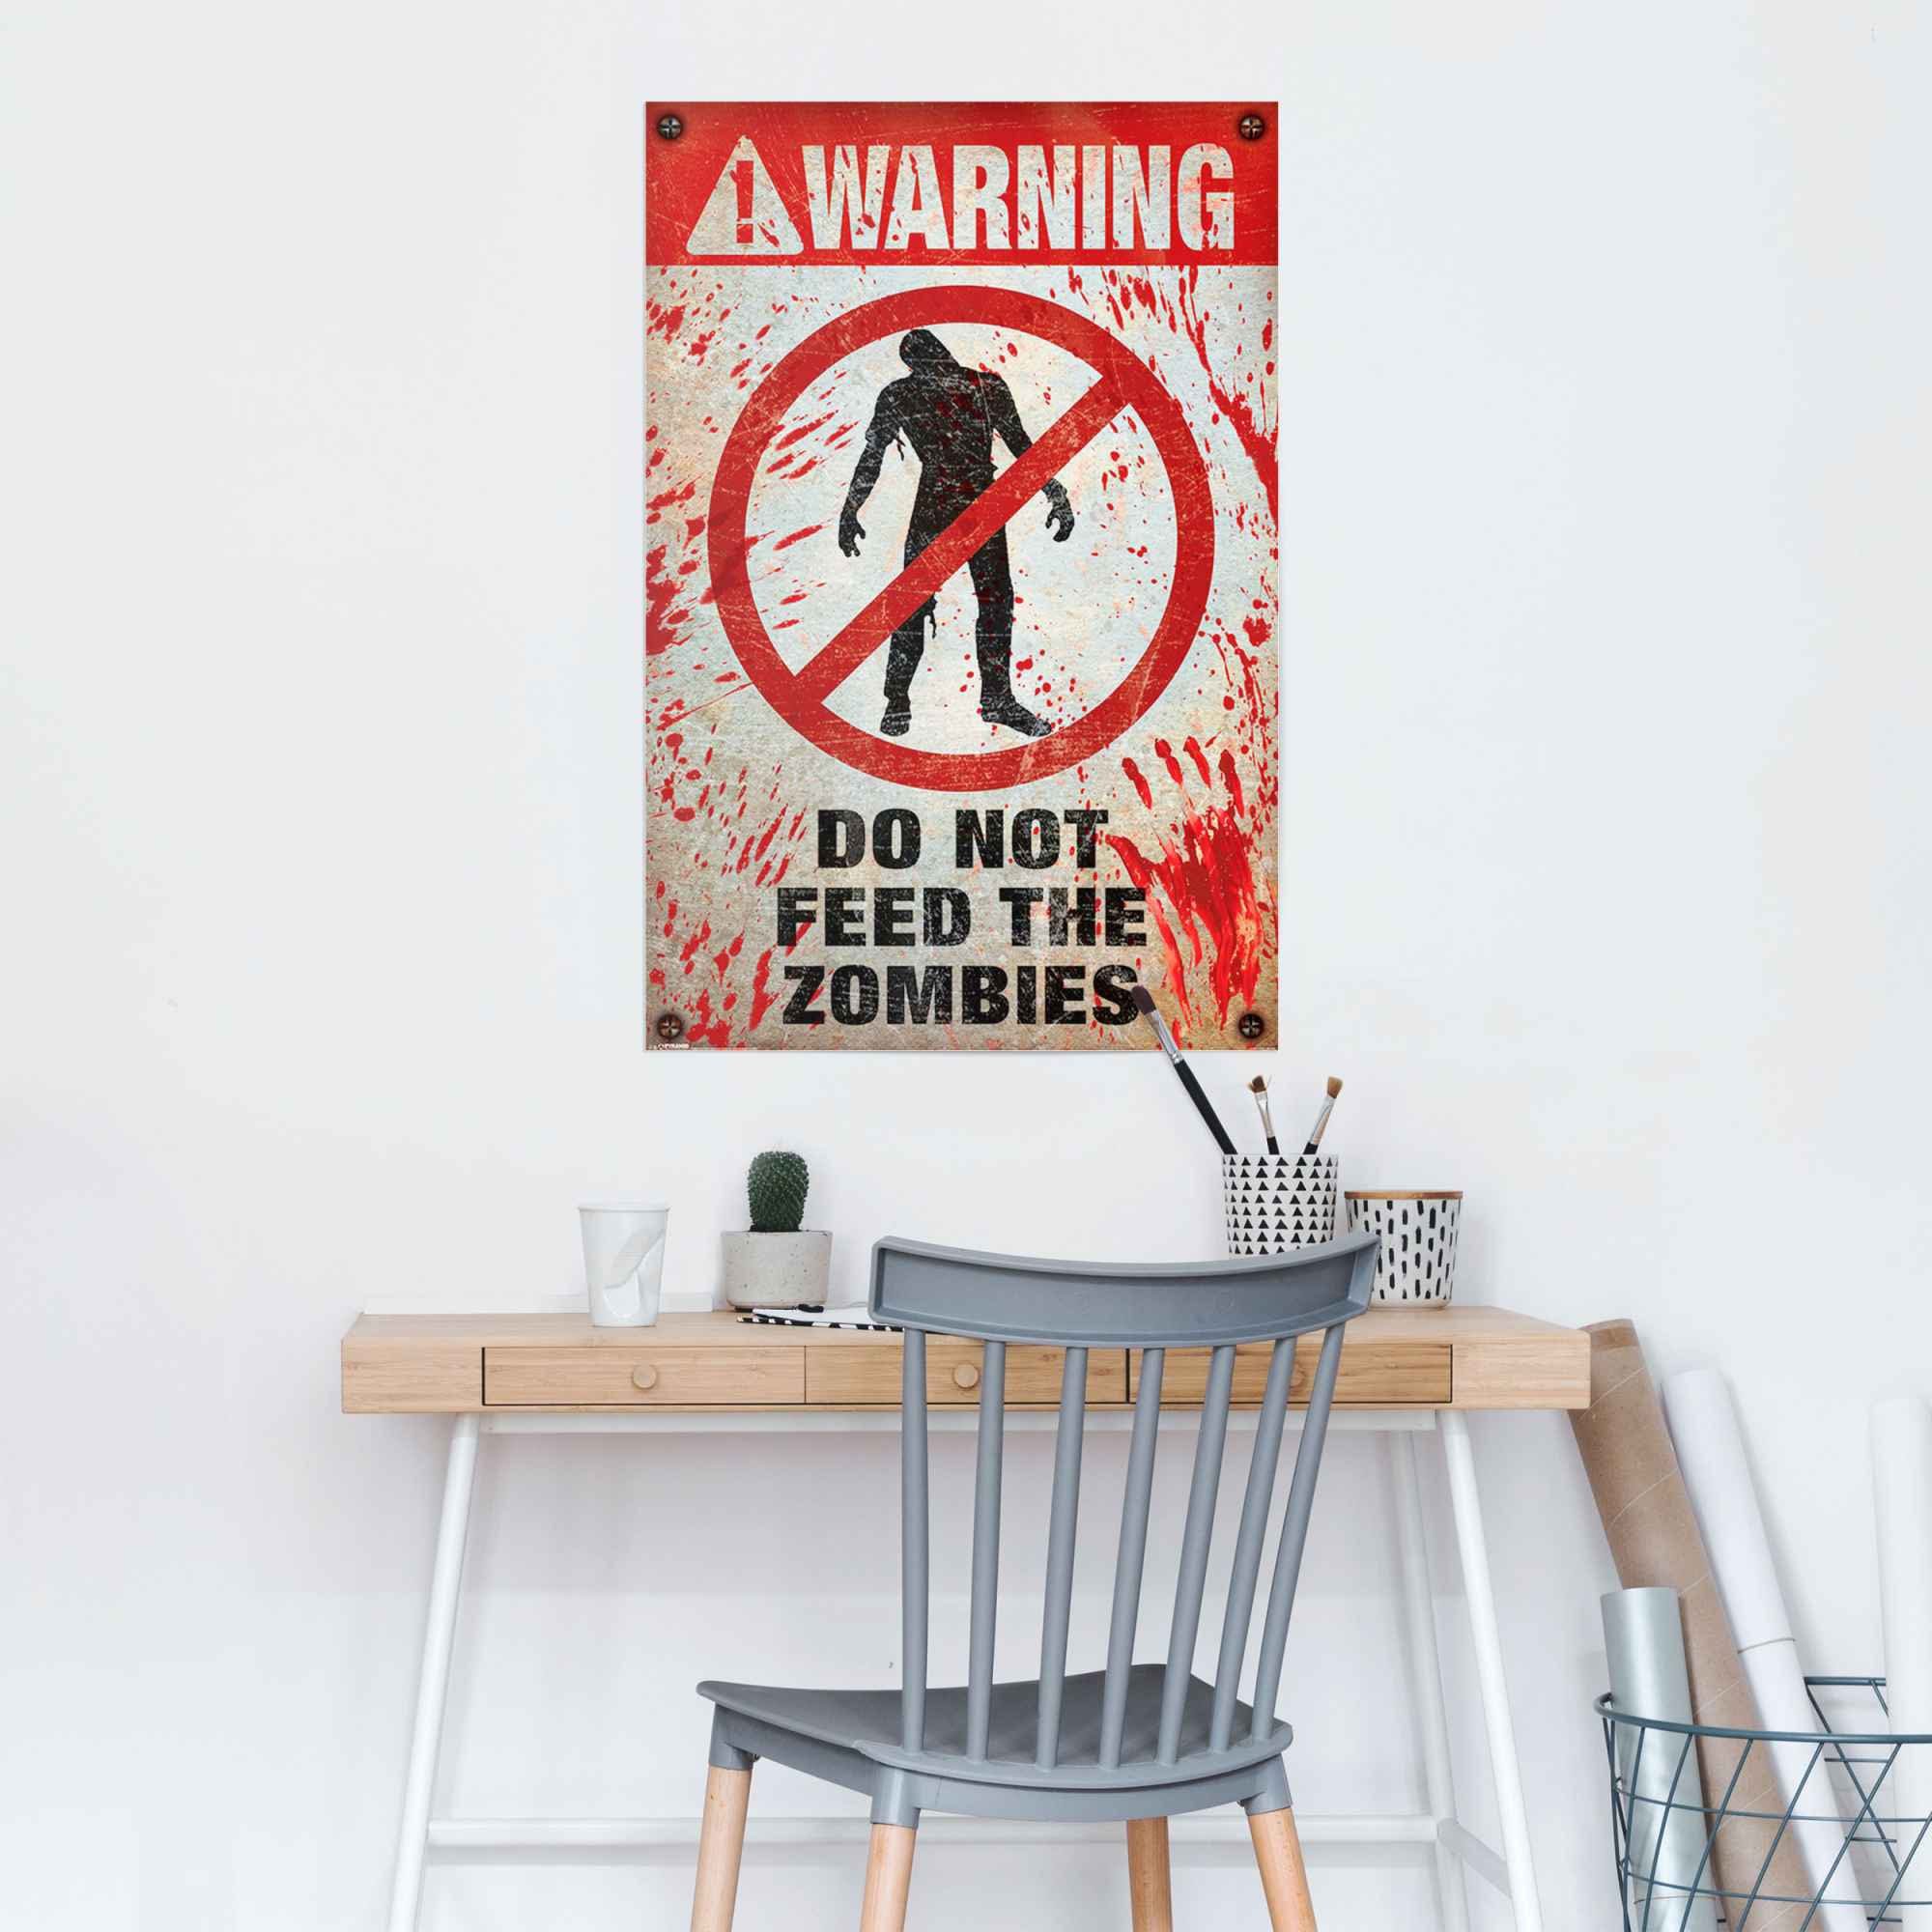 Poster St) The Not Warning! Reinders! Feed (1 Do Zombies,